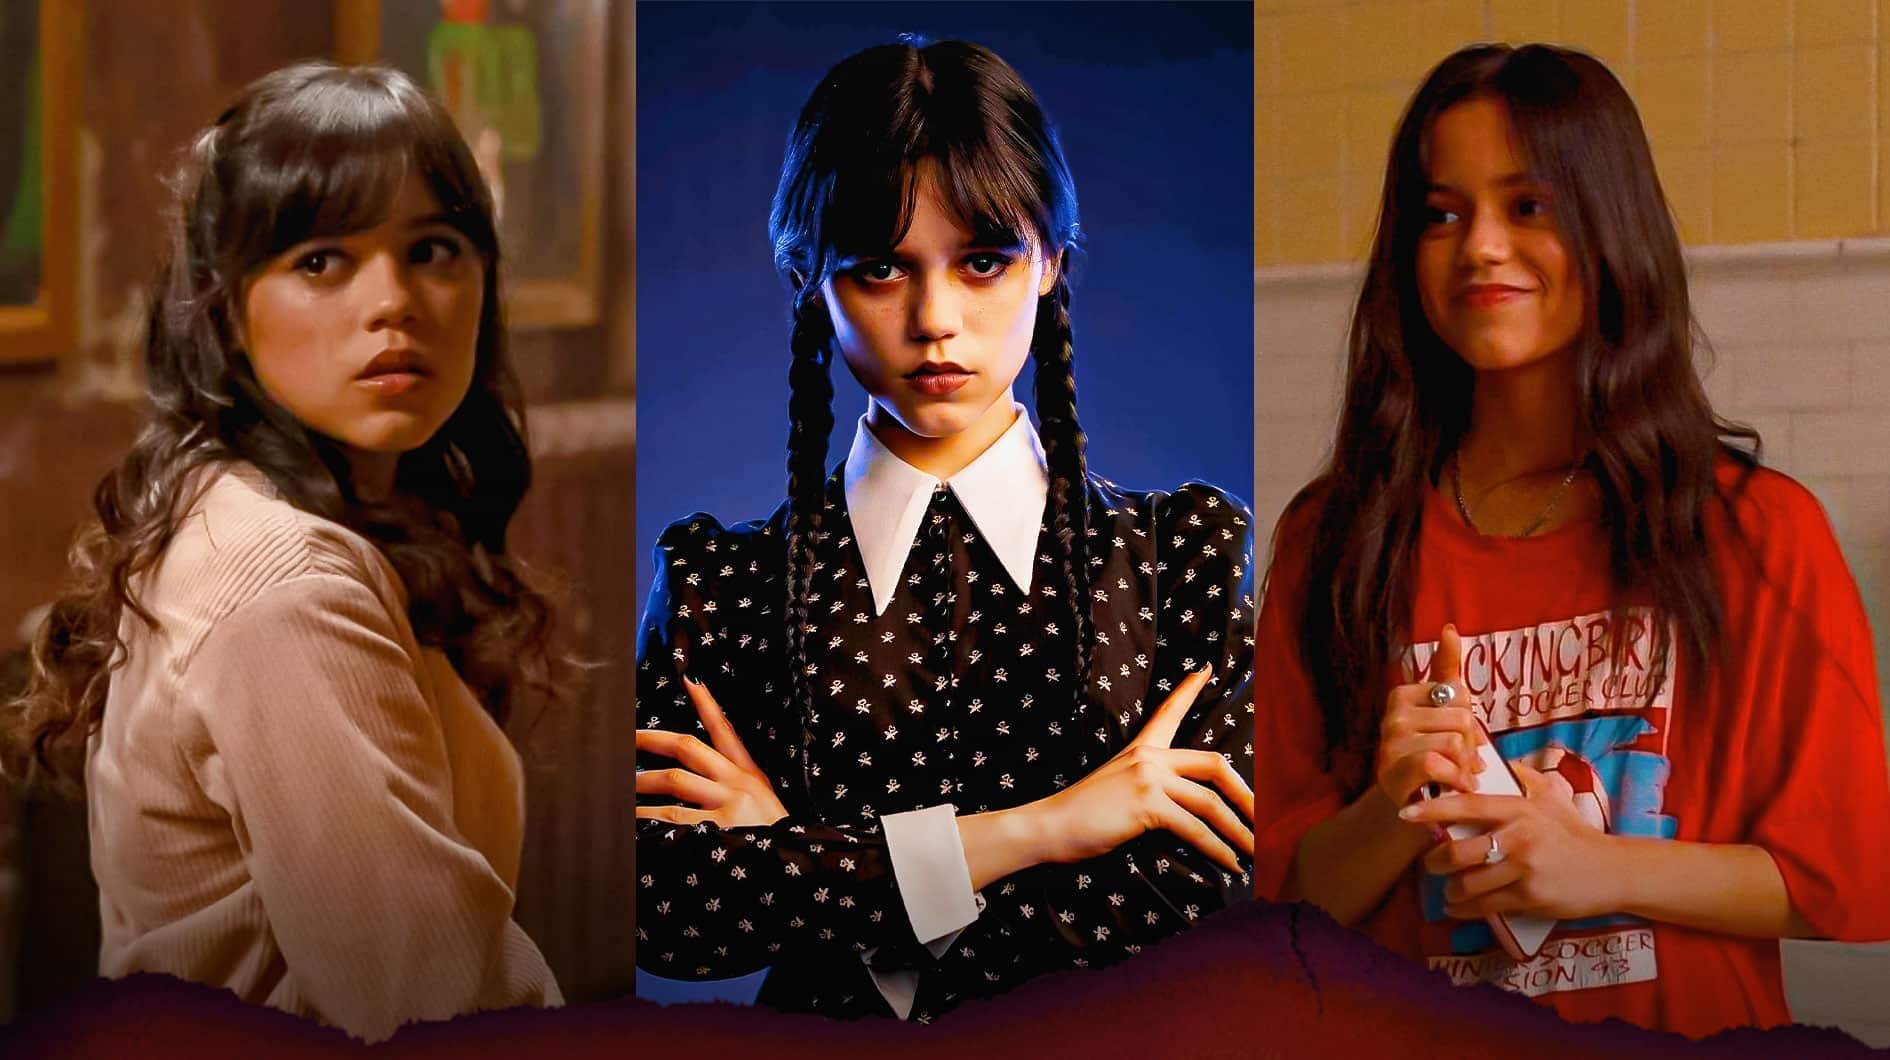 Jenna Ortega as Tara Carpenter in the Scream movies, as Wednesday Adams in Wednesday, and as Vada Cavell in The Fallout.